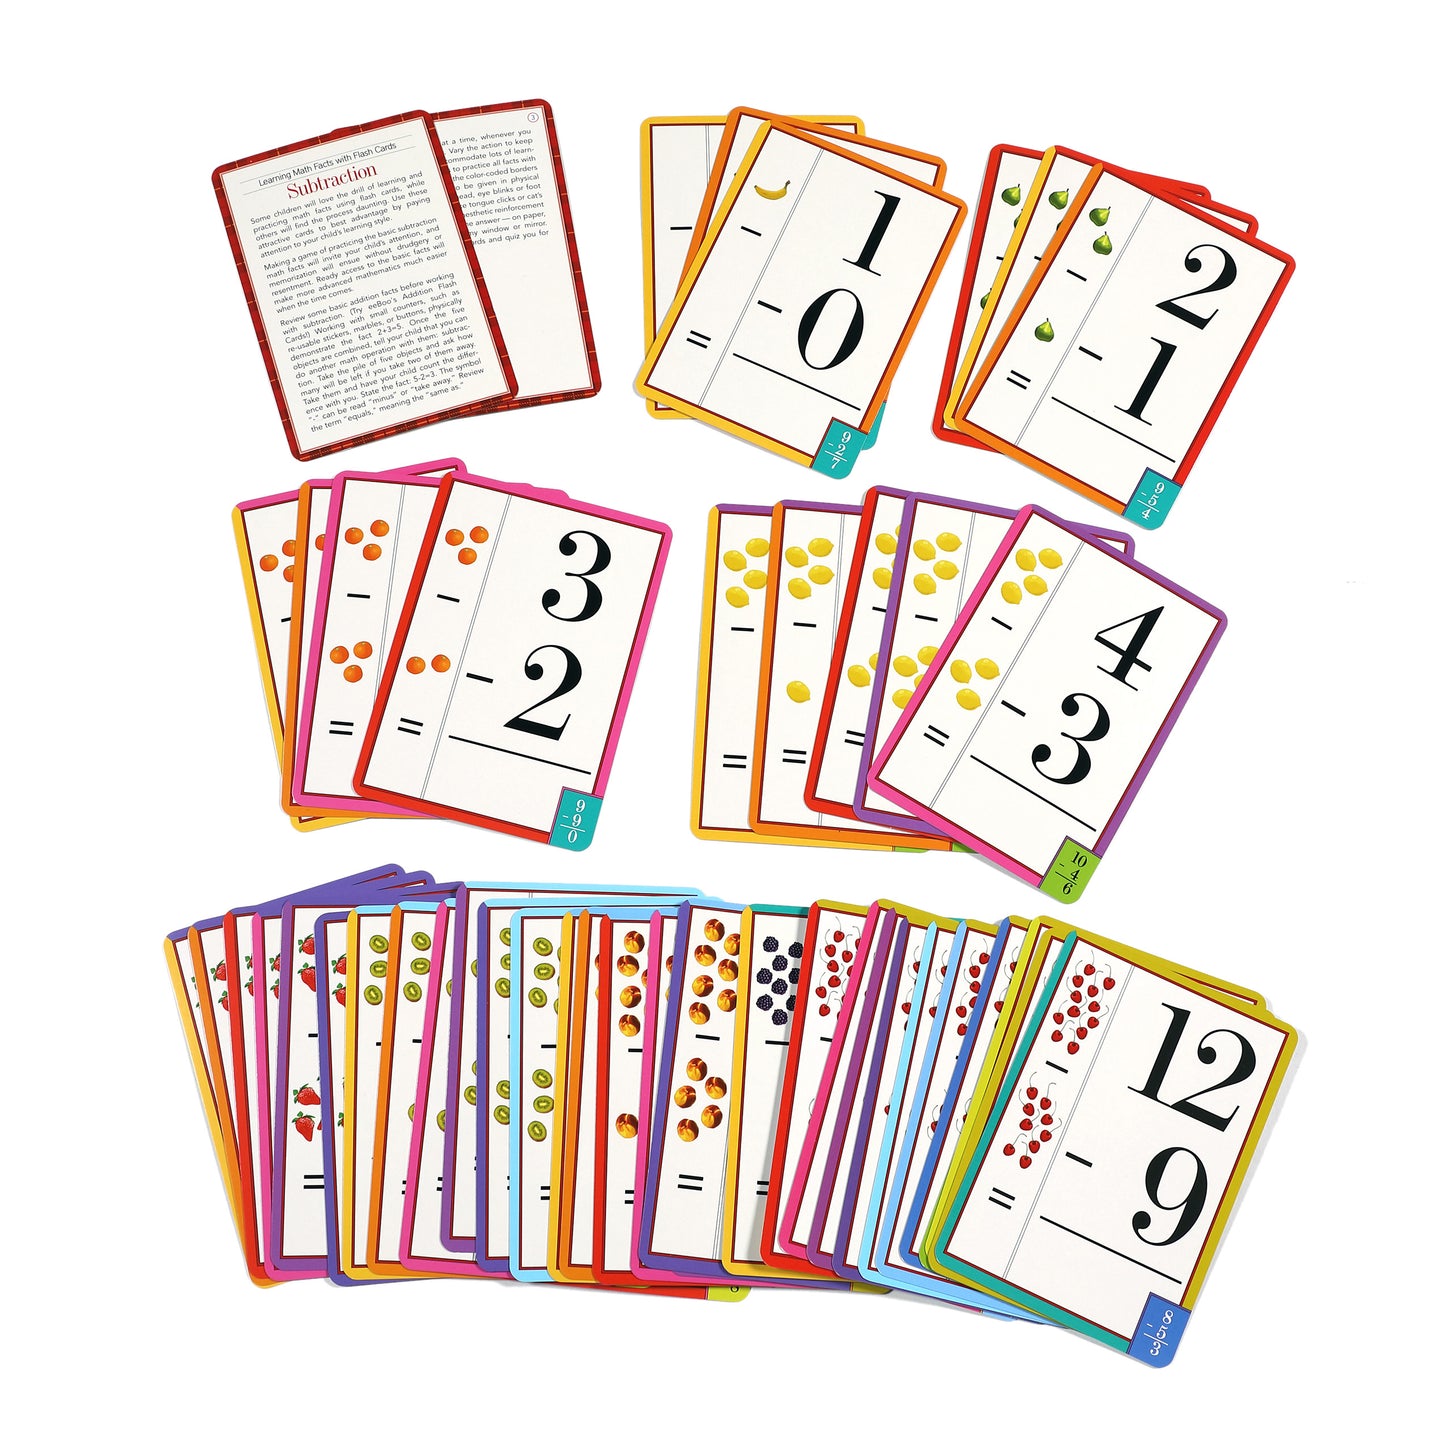 Subtraction Math Flash Cards eeBoo | Educational Flash Cards for Kids Ages 5+